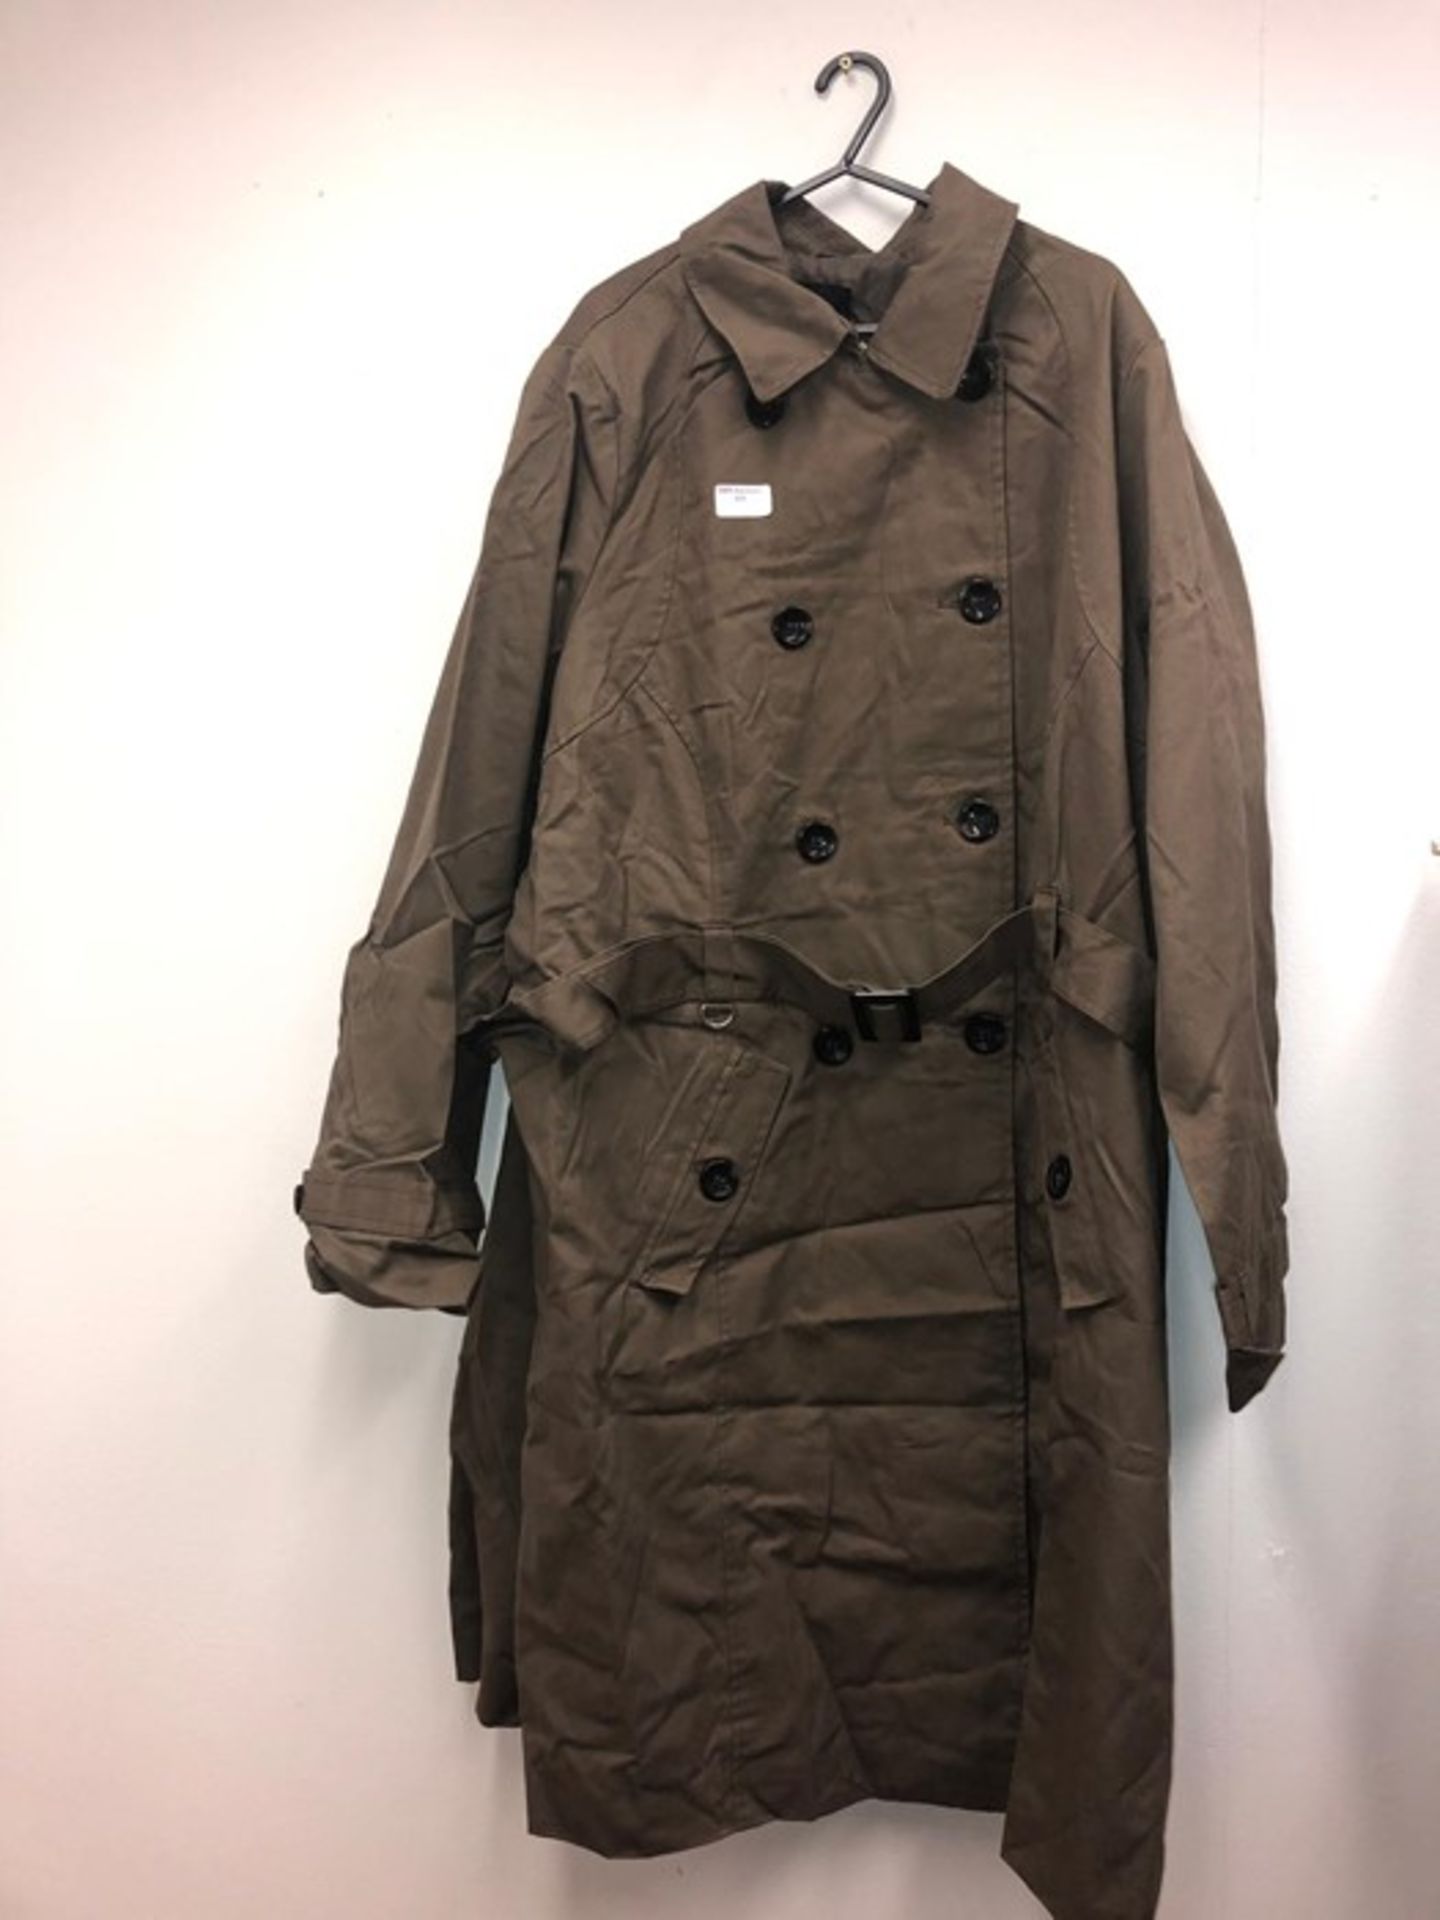 1 AS NEW TAILLISSIME WOMENS TRENCH COAT, SIZE 12 R